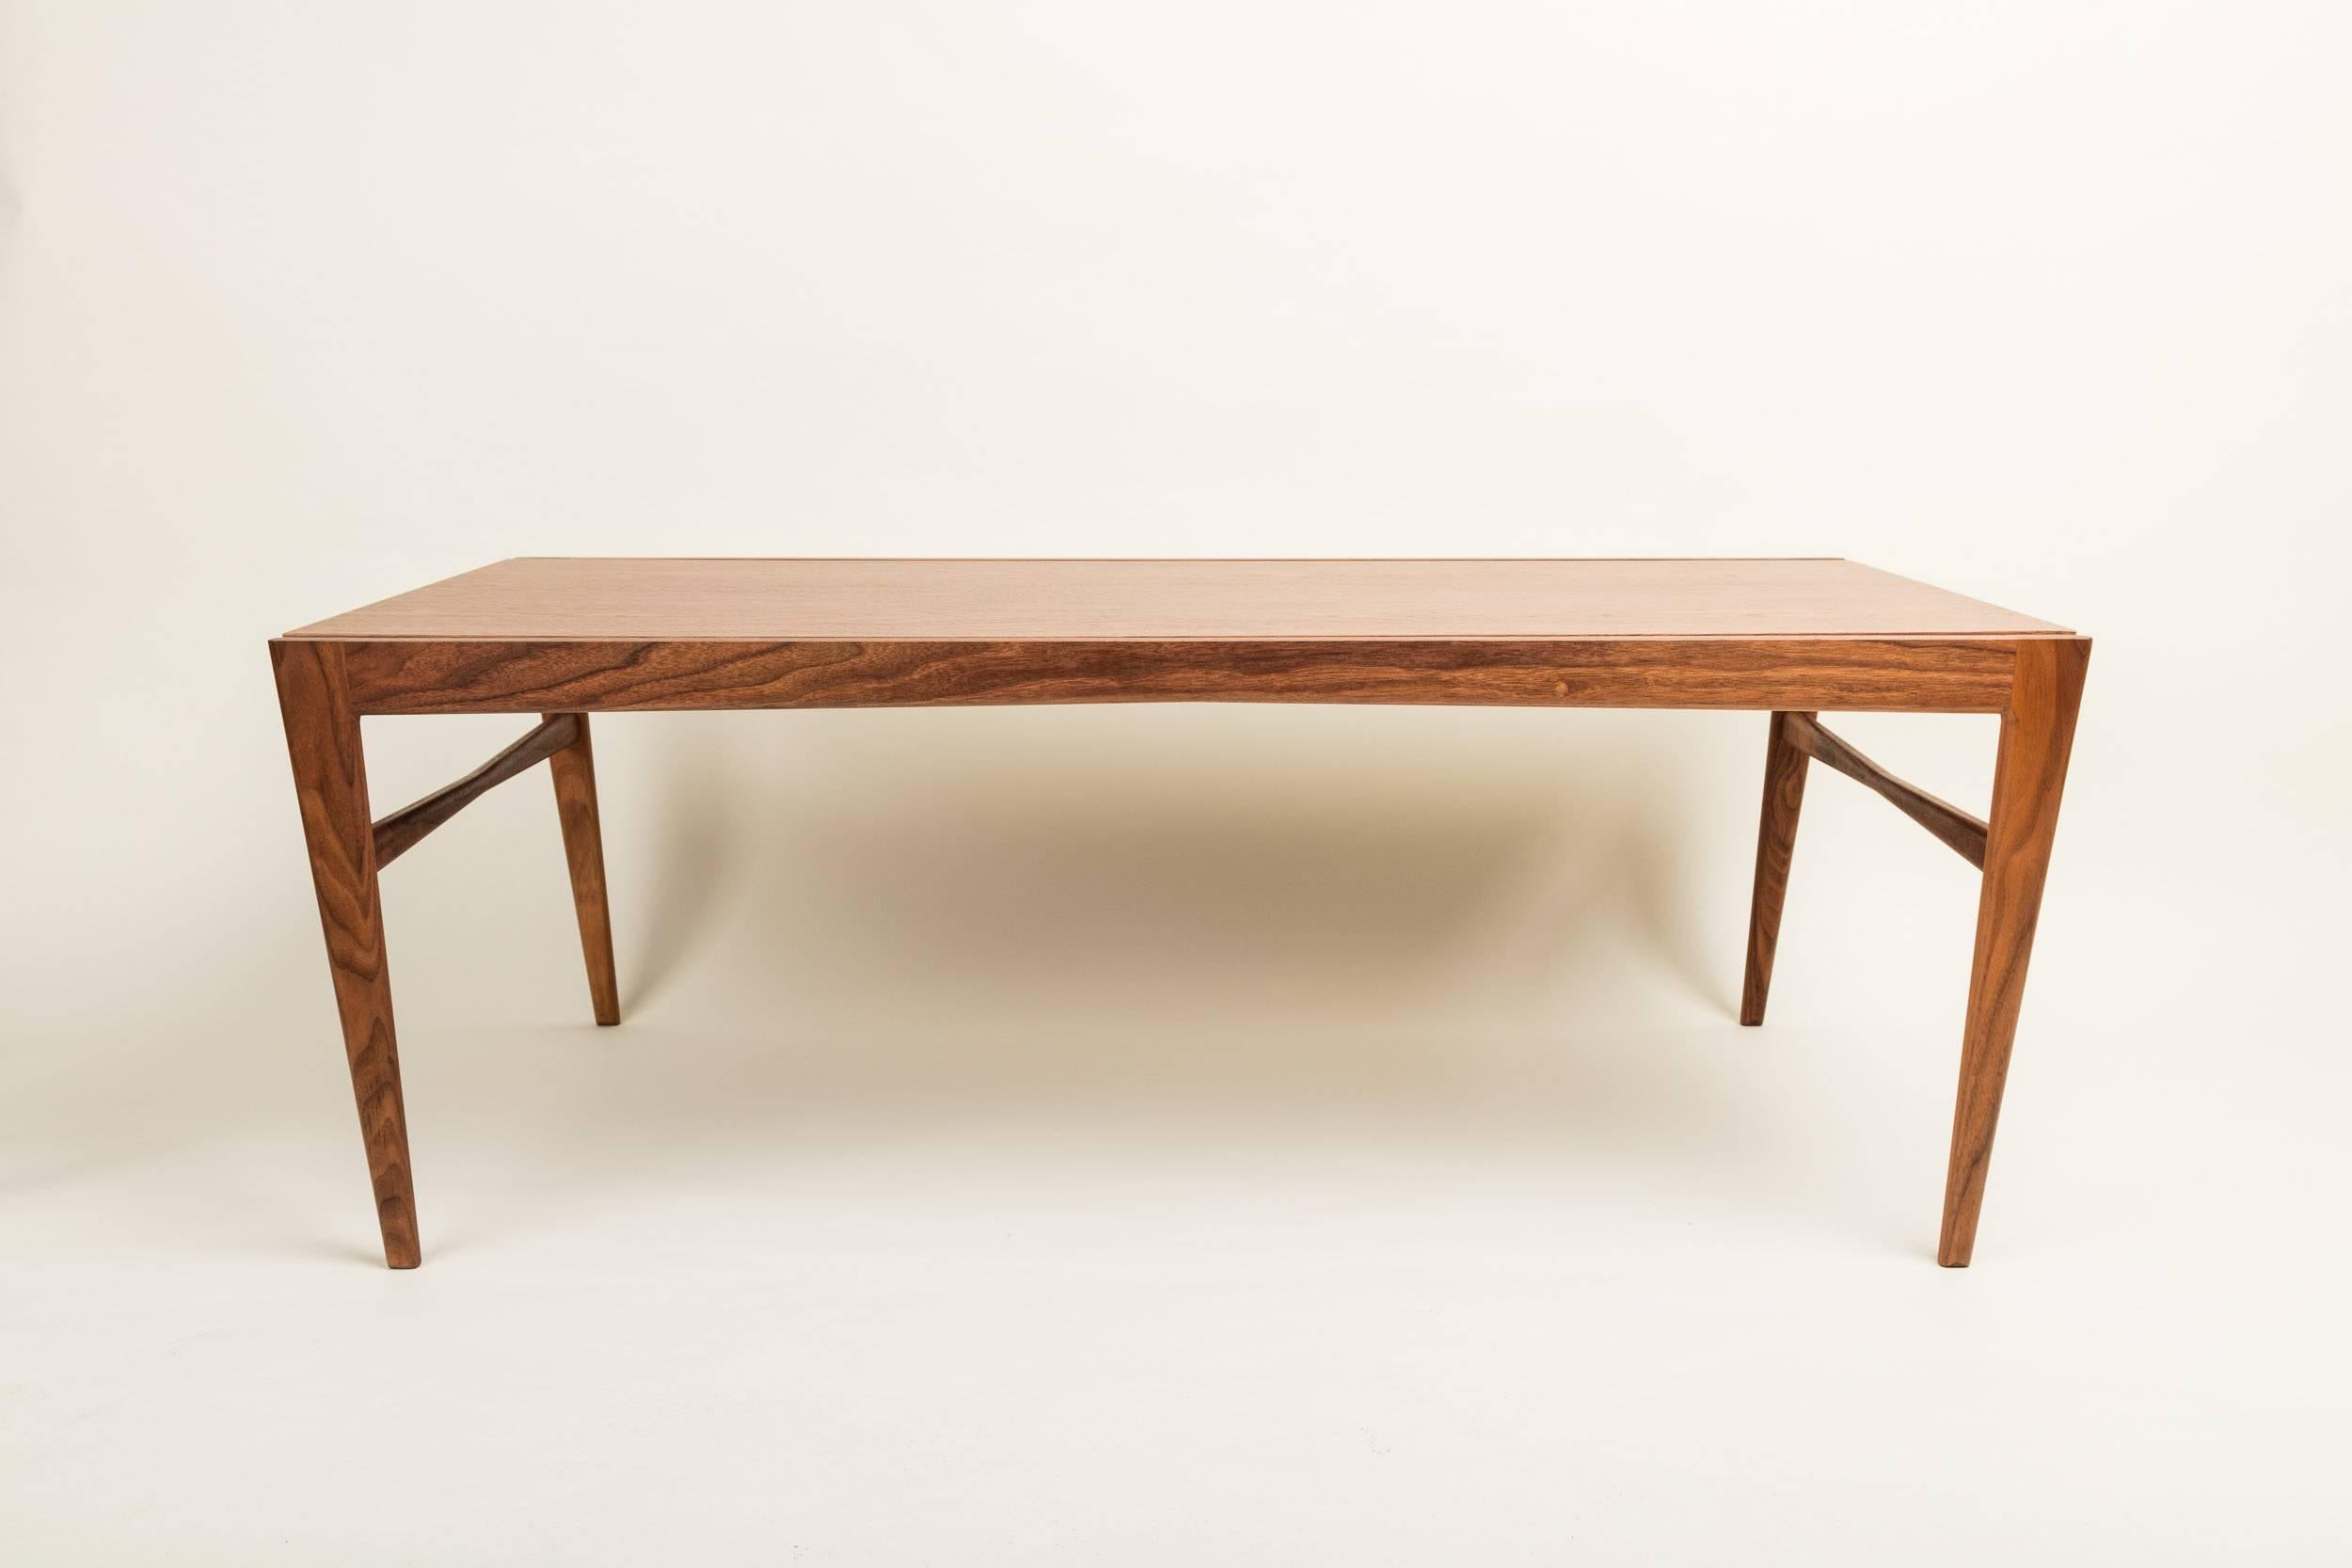 Lilian Handmade Walnut Coffee Table In New Condition For Sale In San Diego, CA